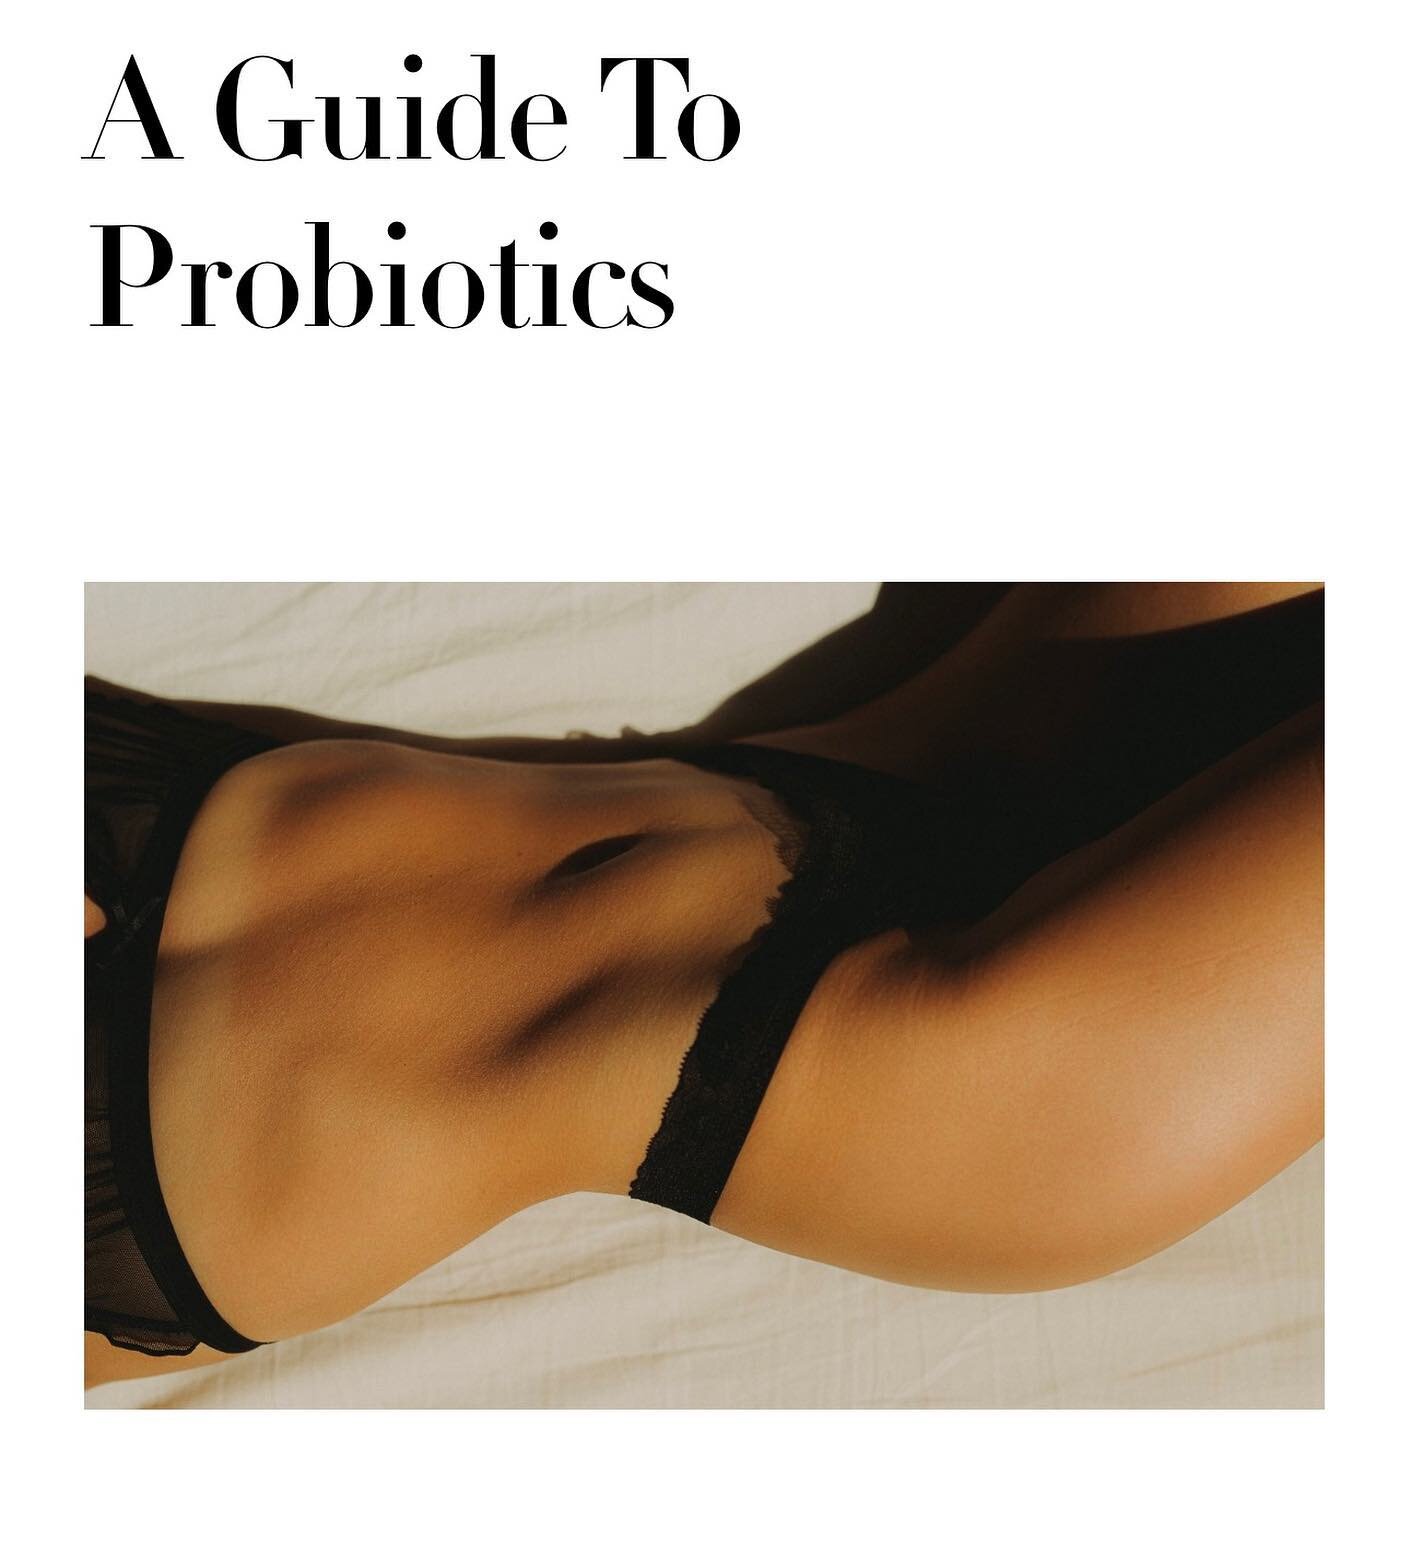 &ldquo;A GUIDE TO PROBIOTICS&rdquo; - 

go check out our blog post about one of the most important factors in our health&hellip;the gut.

#gut #guthealth #gutsupplements #guthealing #guthealthmatters #gutmicrobiome